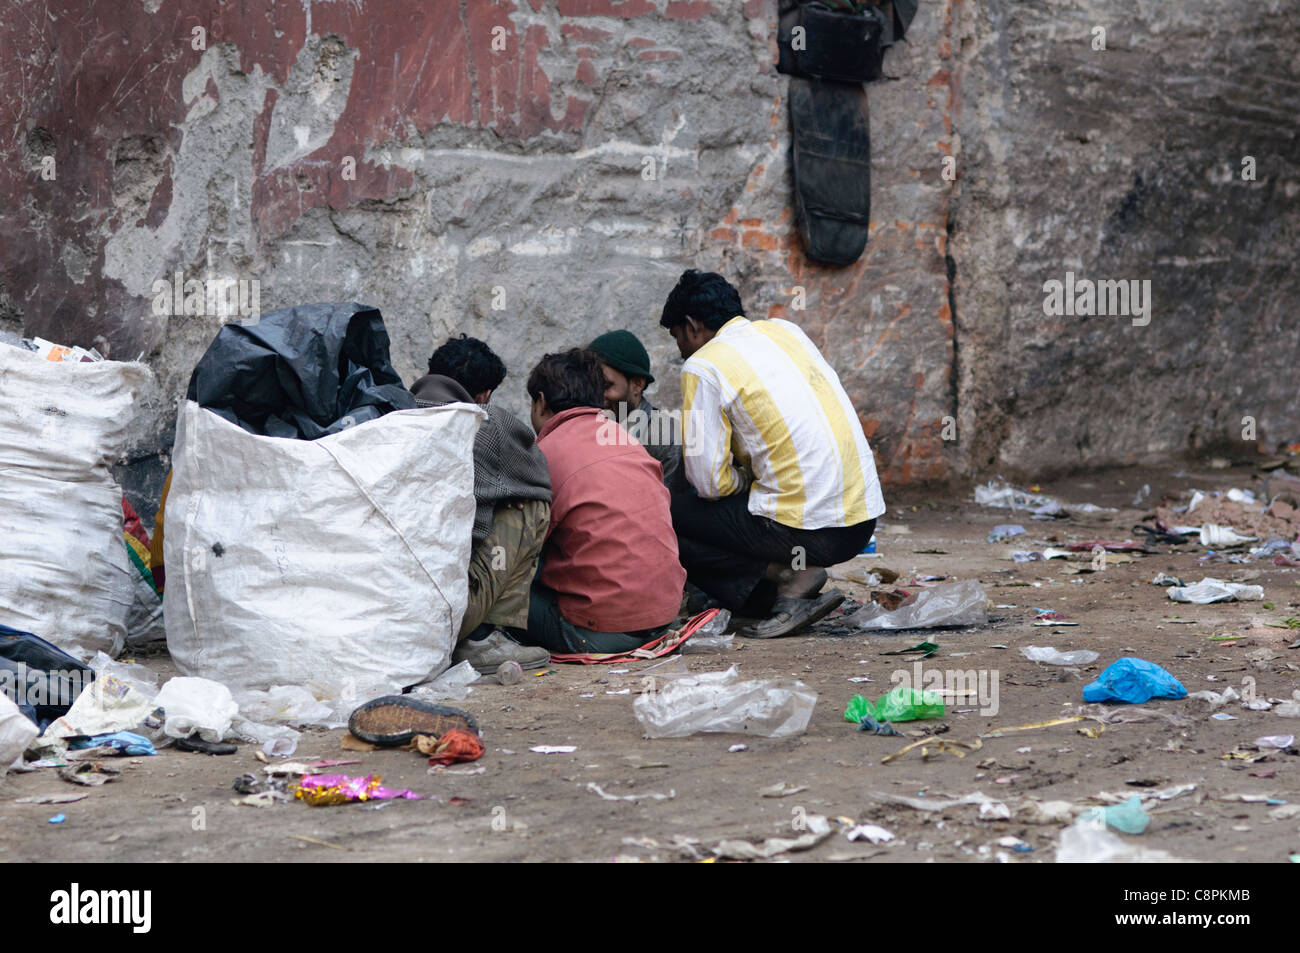 Men huddle around to smoke heroin in Delhi. Drug abuse in India is increasing, especially in large urban areas. Stock Photo